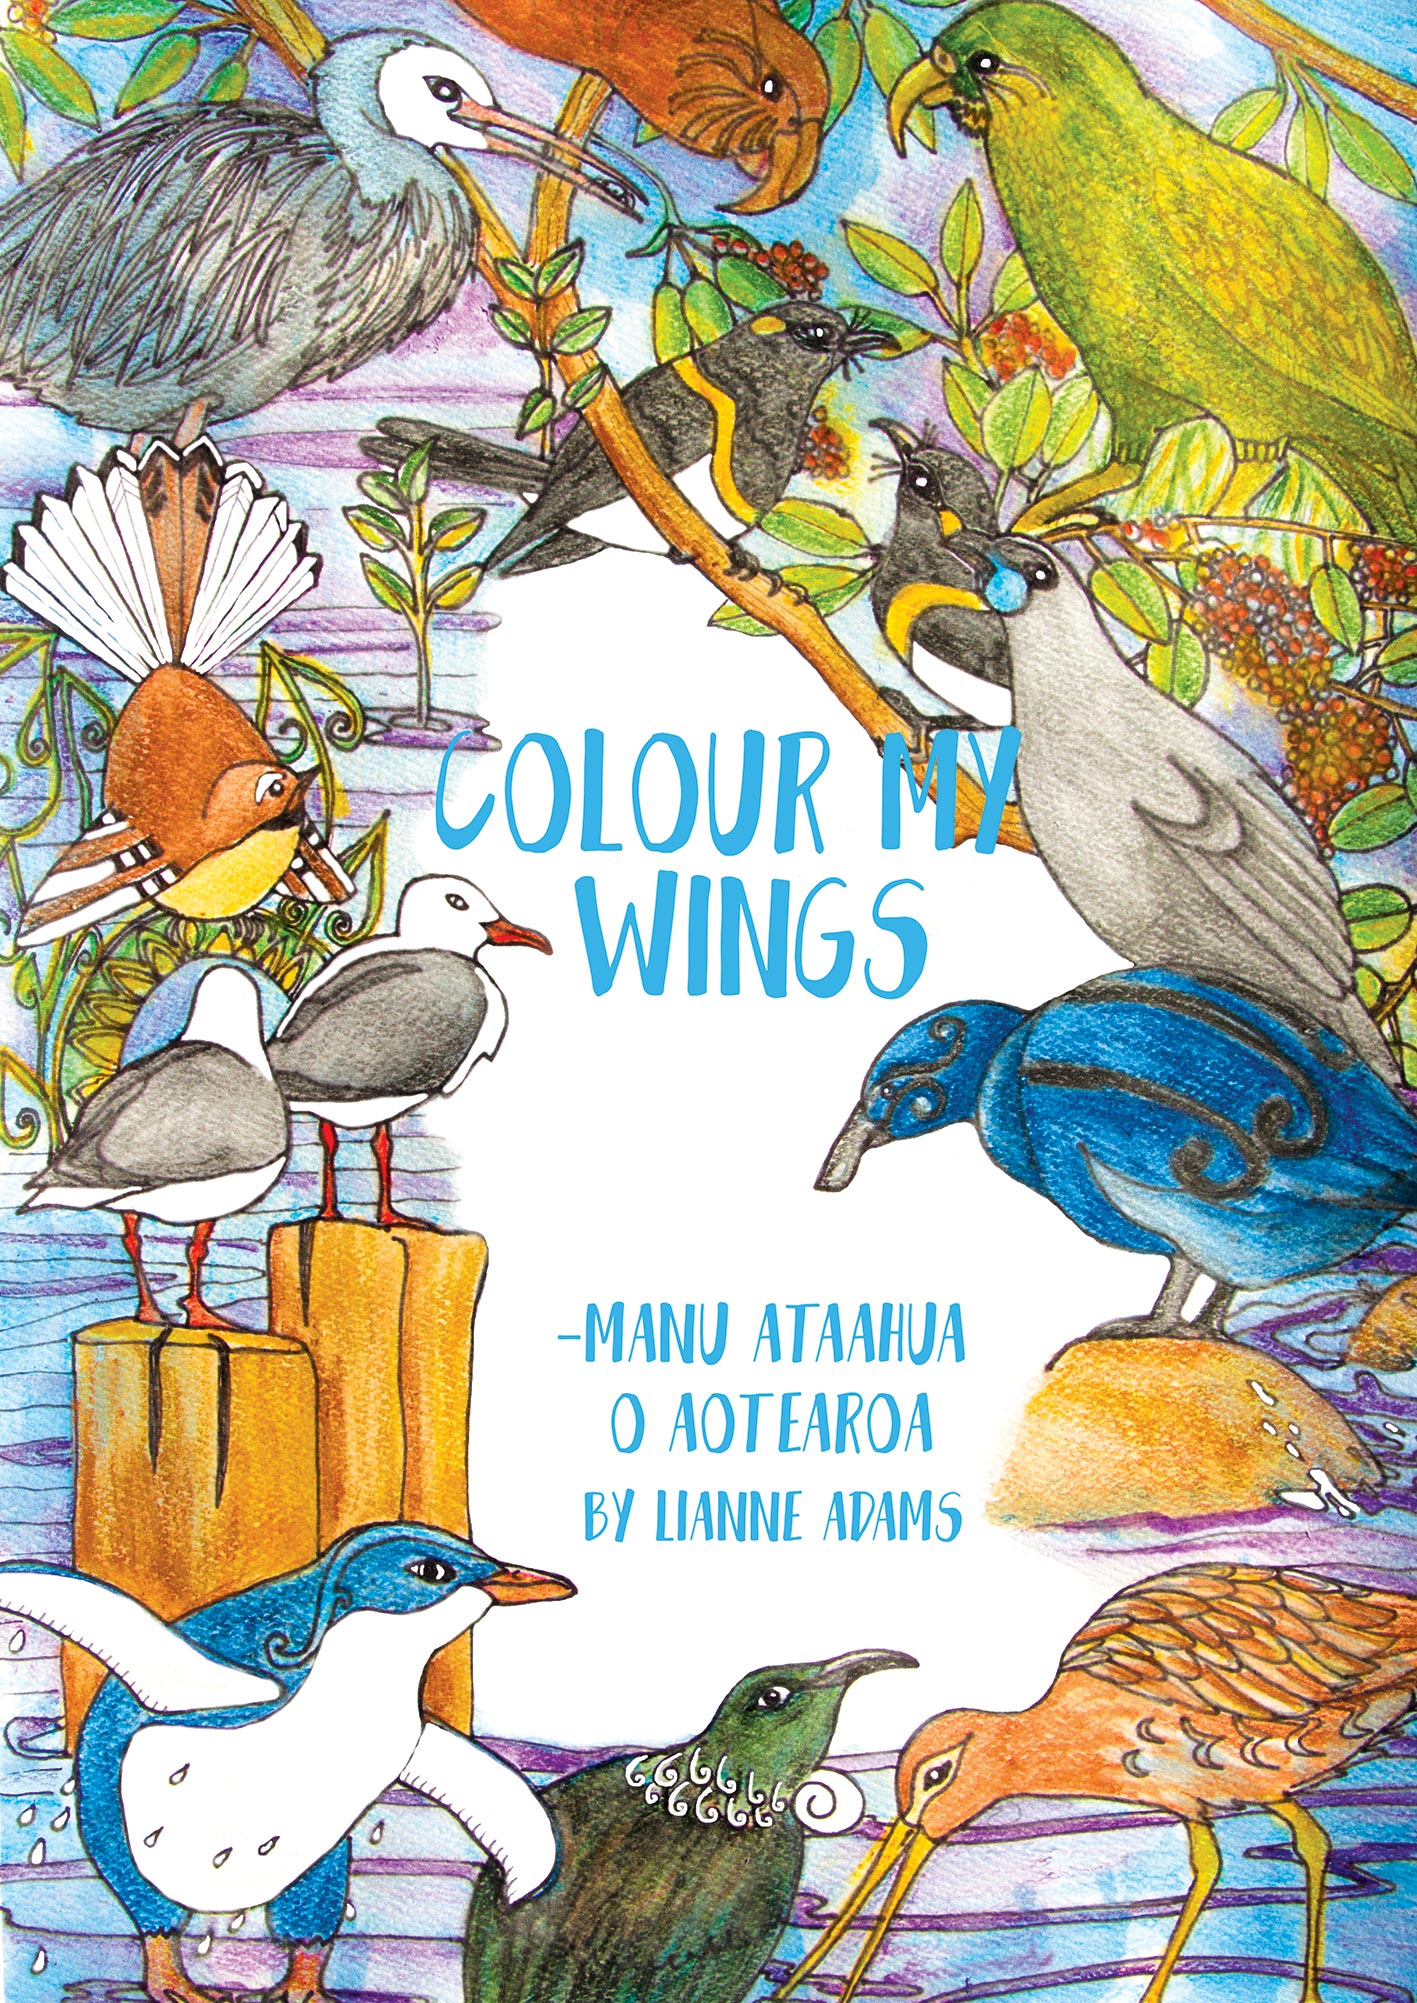 Colour My Wings - colouring book